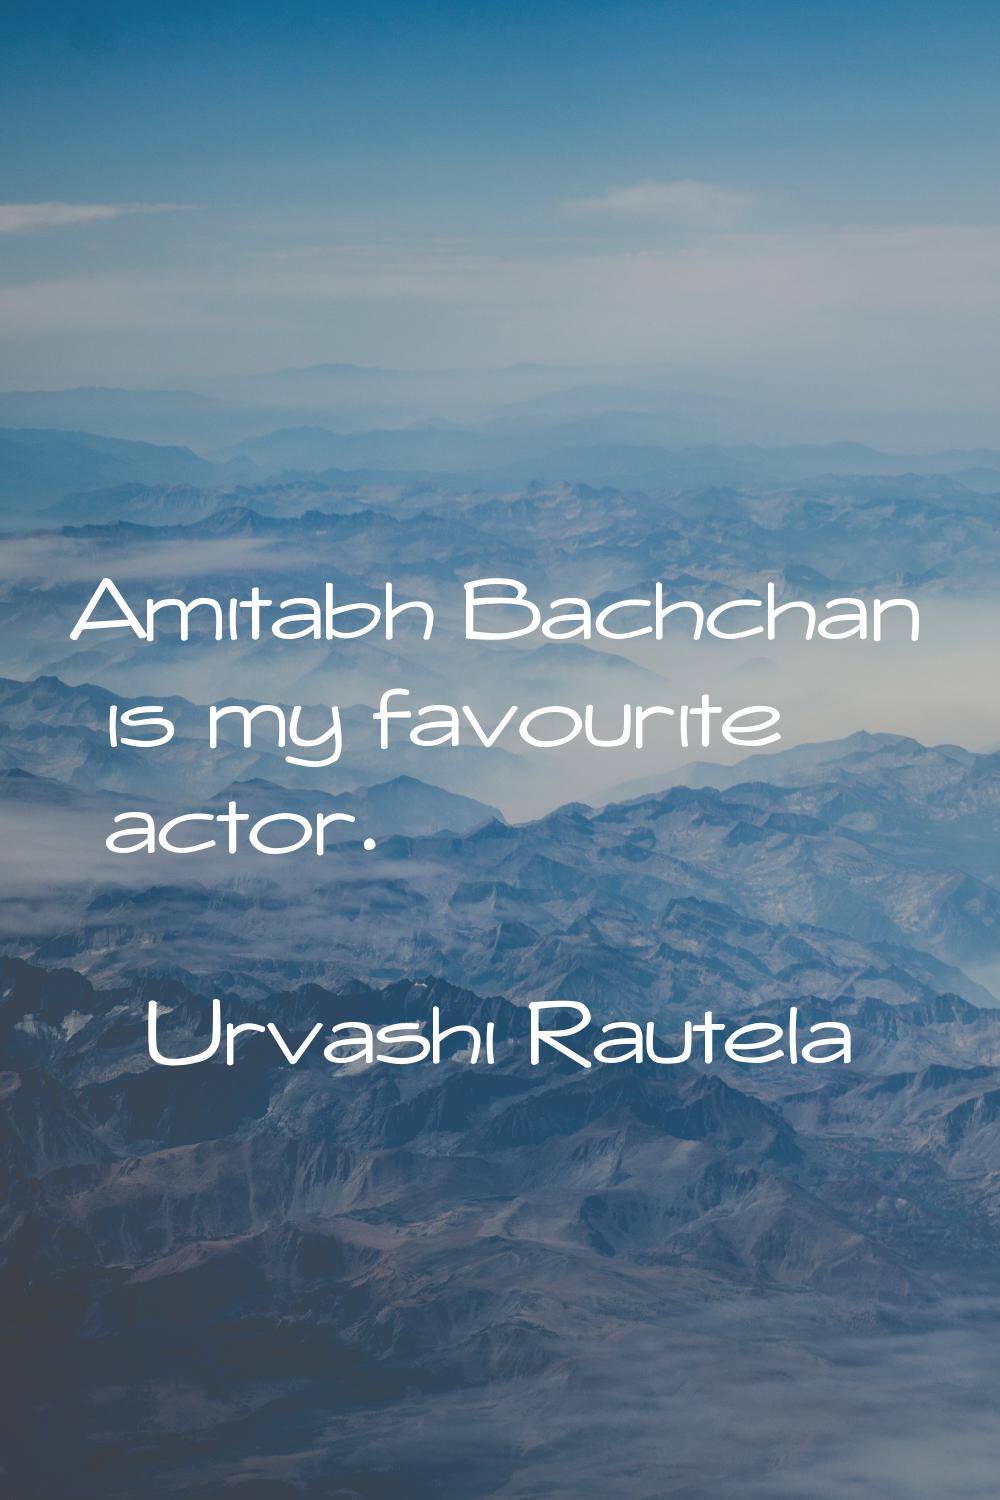 Amitabh Bachchan is my favourite actor.